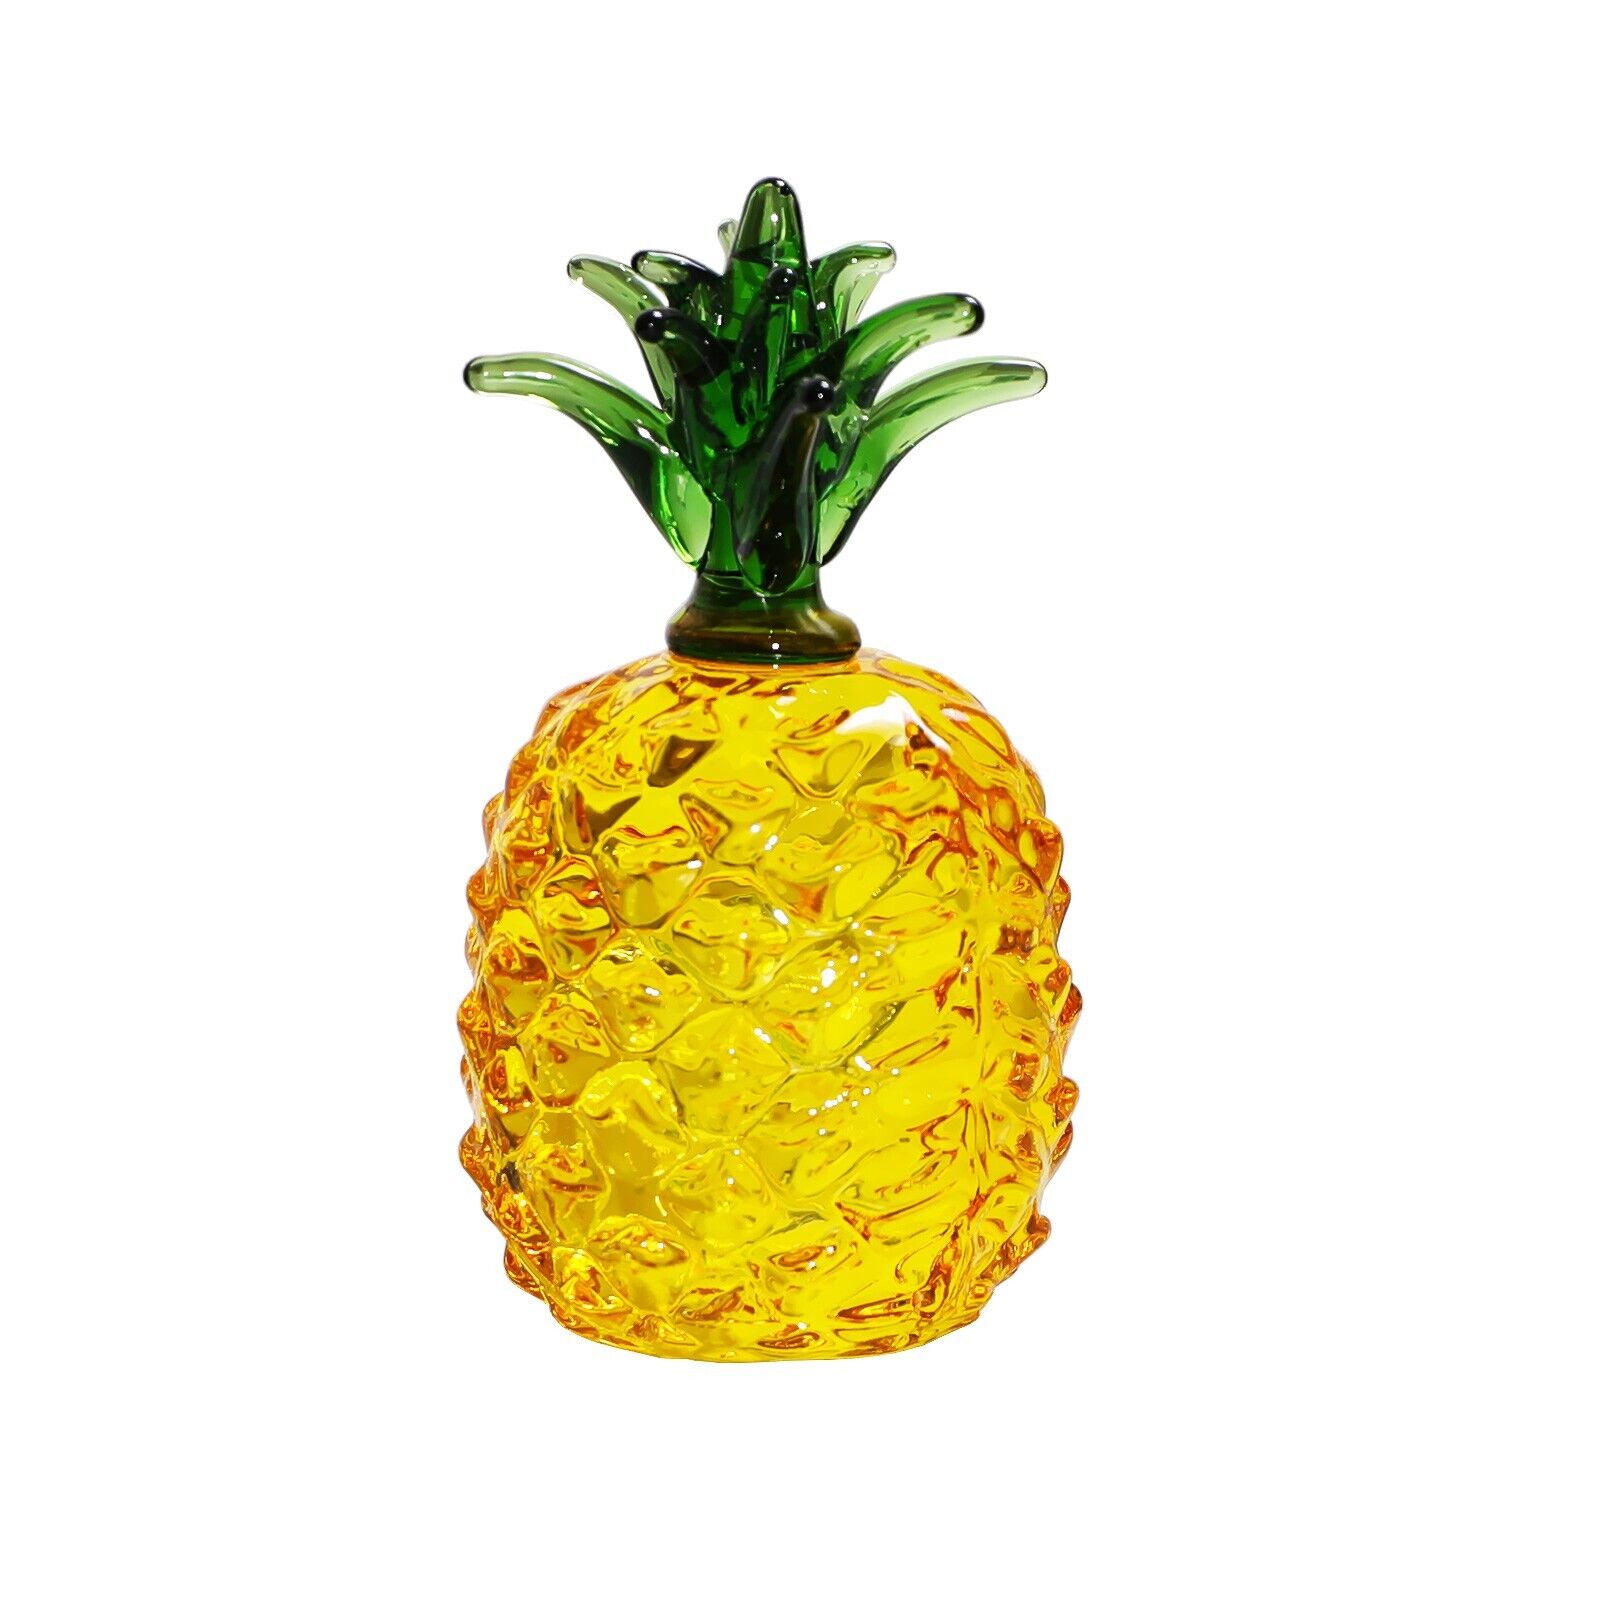 Crystal Yellow Pineapple Figurines Glass Fruit Paperweight Art Collection Gift